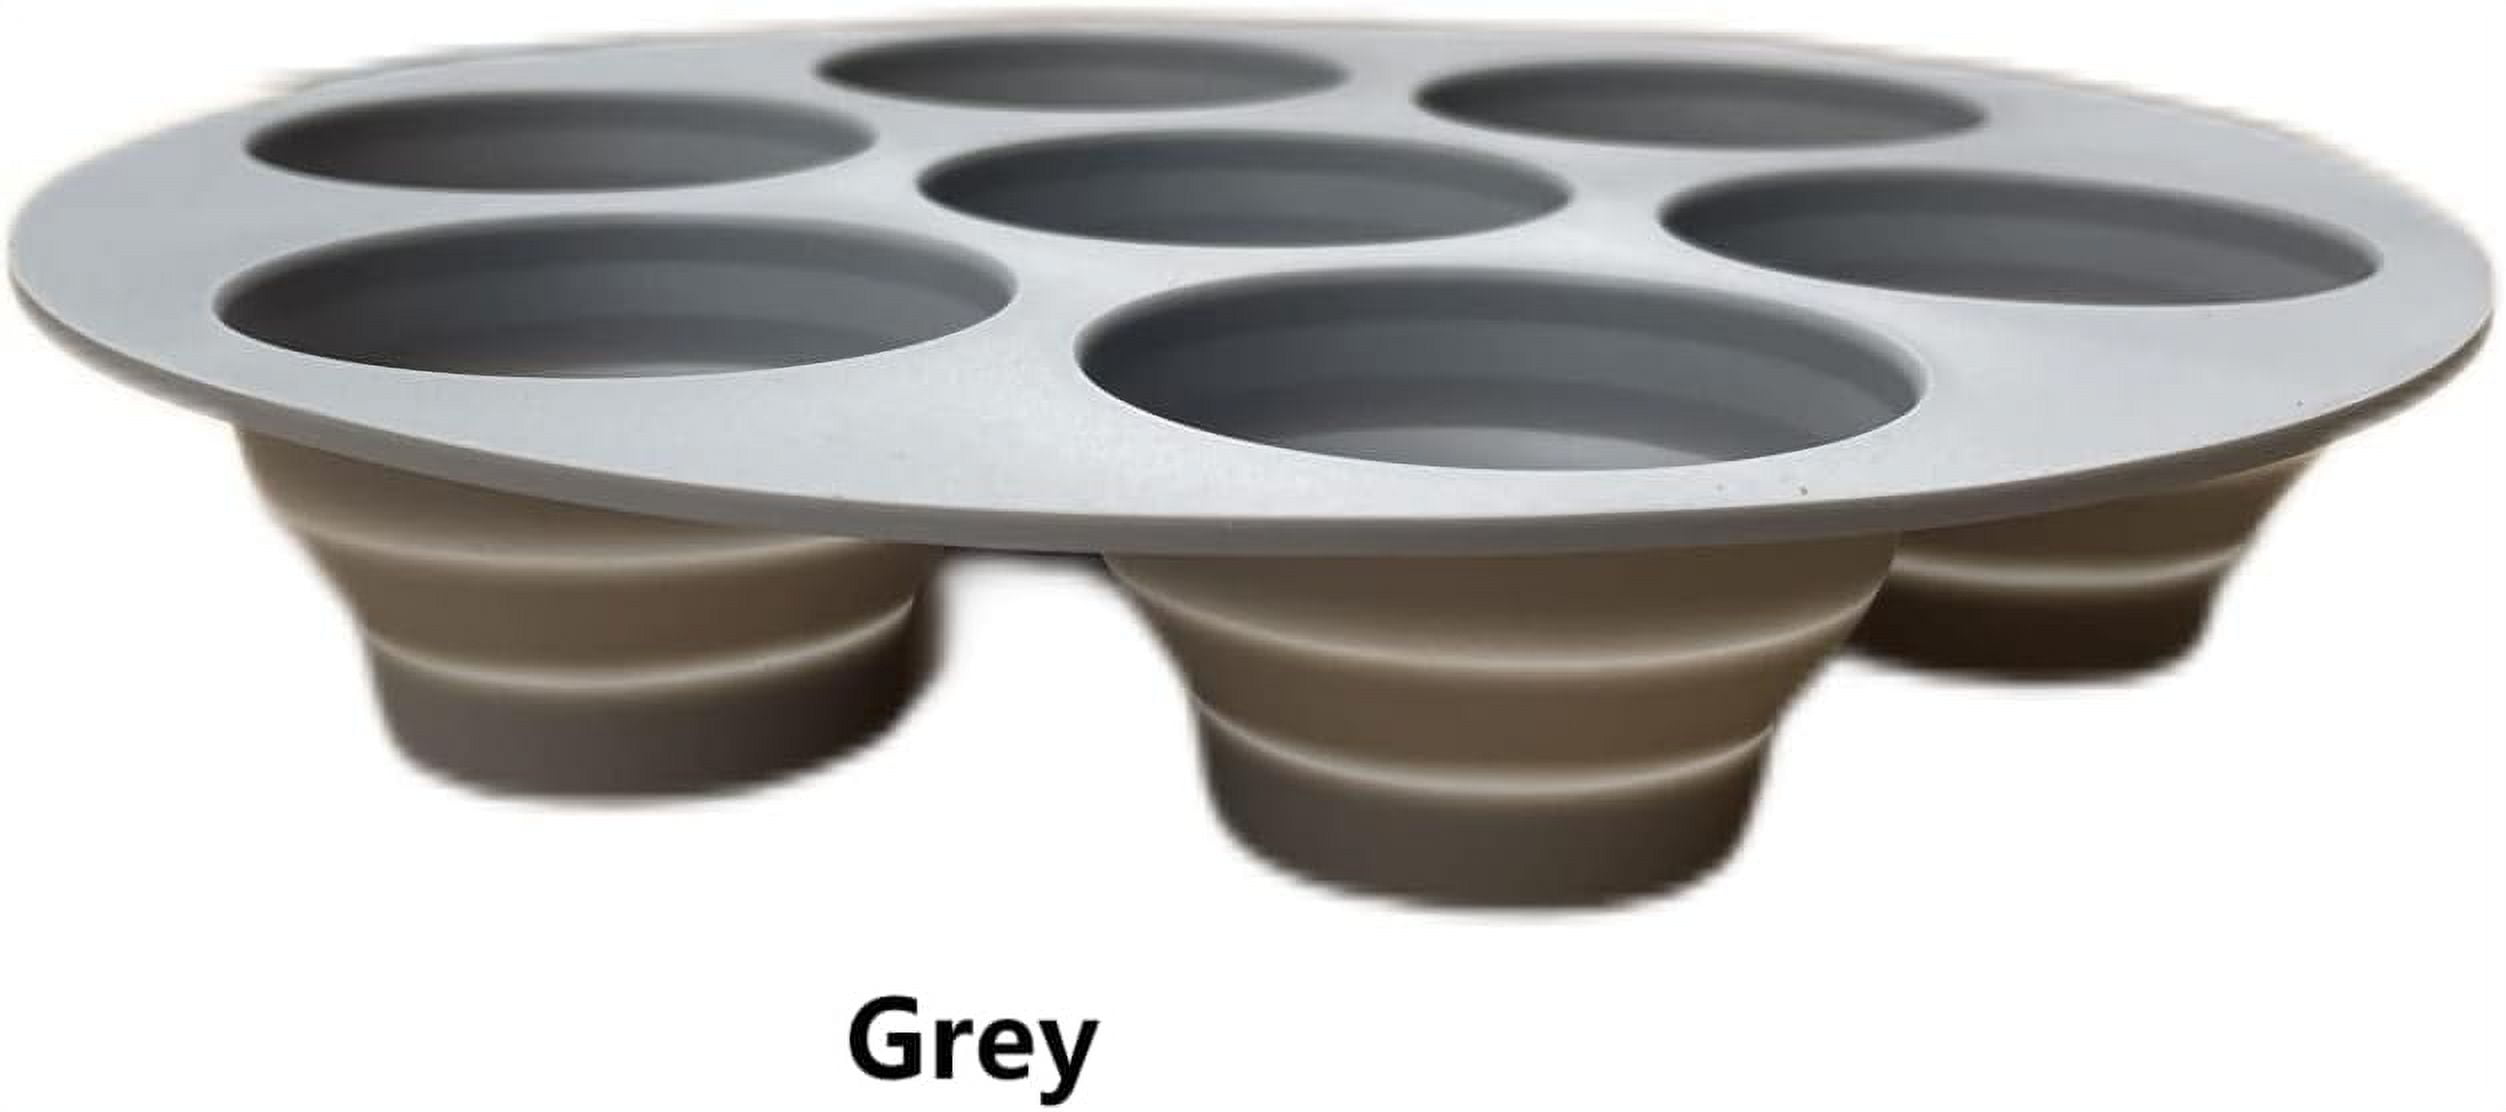 Air Fryer Silicone Curled Muffin Pan Cupcake Tray Baking Cups with Good  Grips Handles, 7 Cupcake Silicone Muffin Pans for Baking Cupcake Mold for  4.5-8.5L Air Fryer Accessories - Nonstick Pan Chocolate